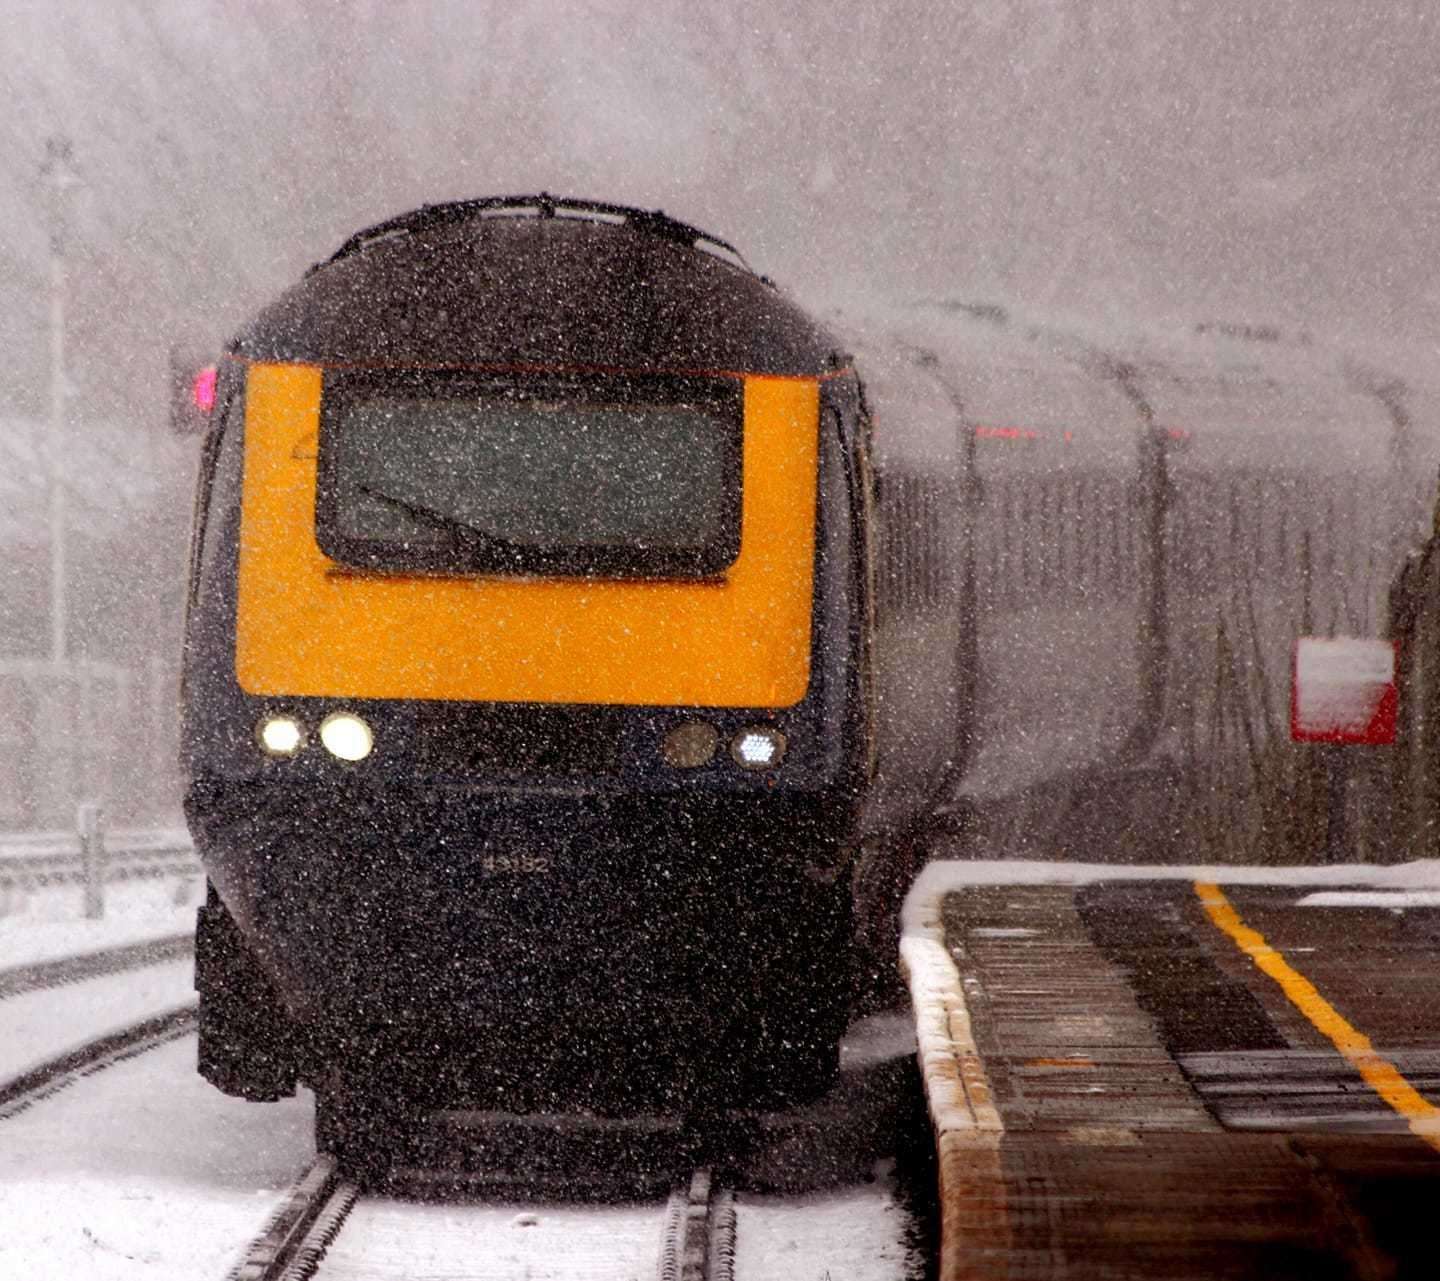 ScotRail has warned of a snow-related signal fault. File image.